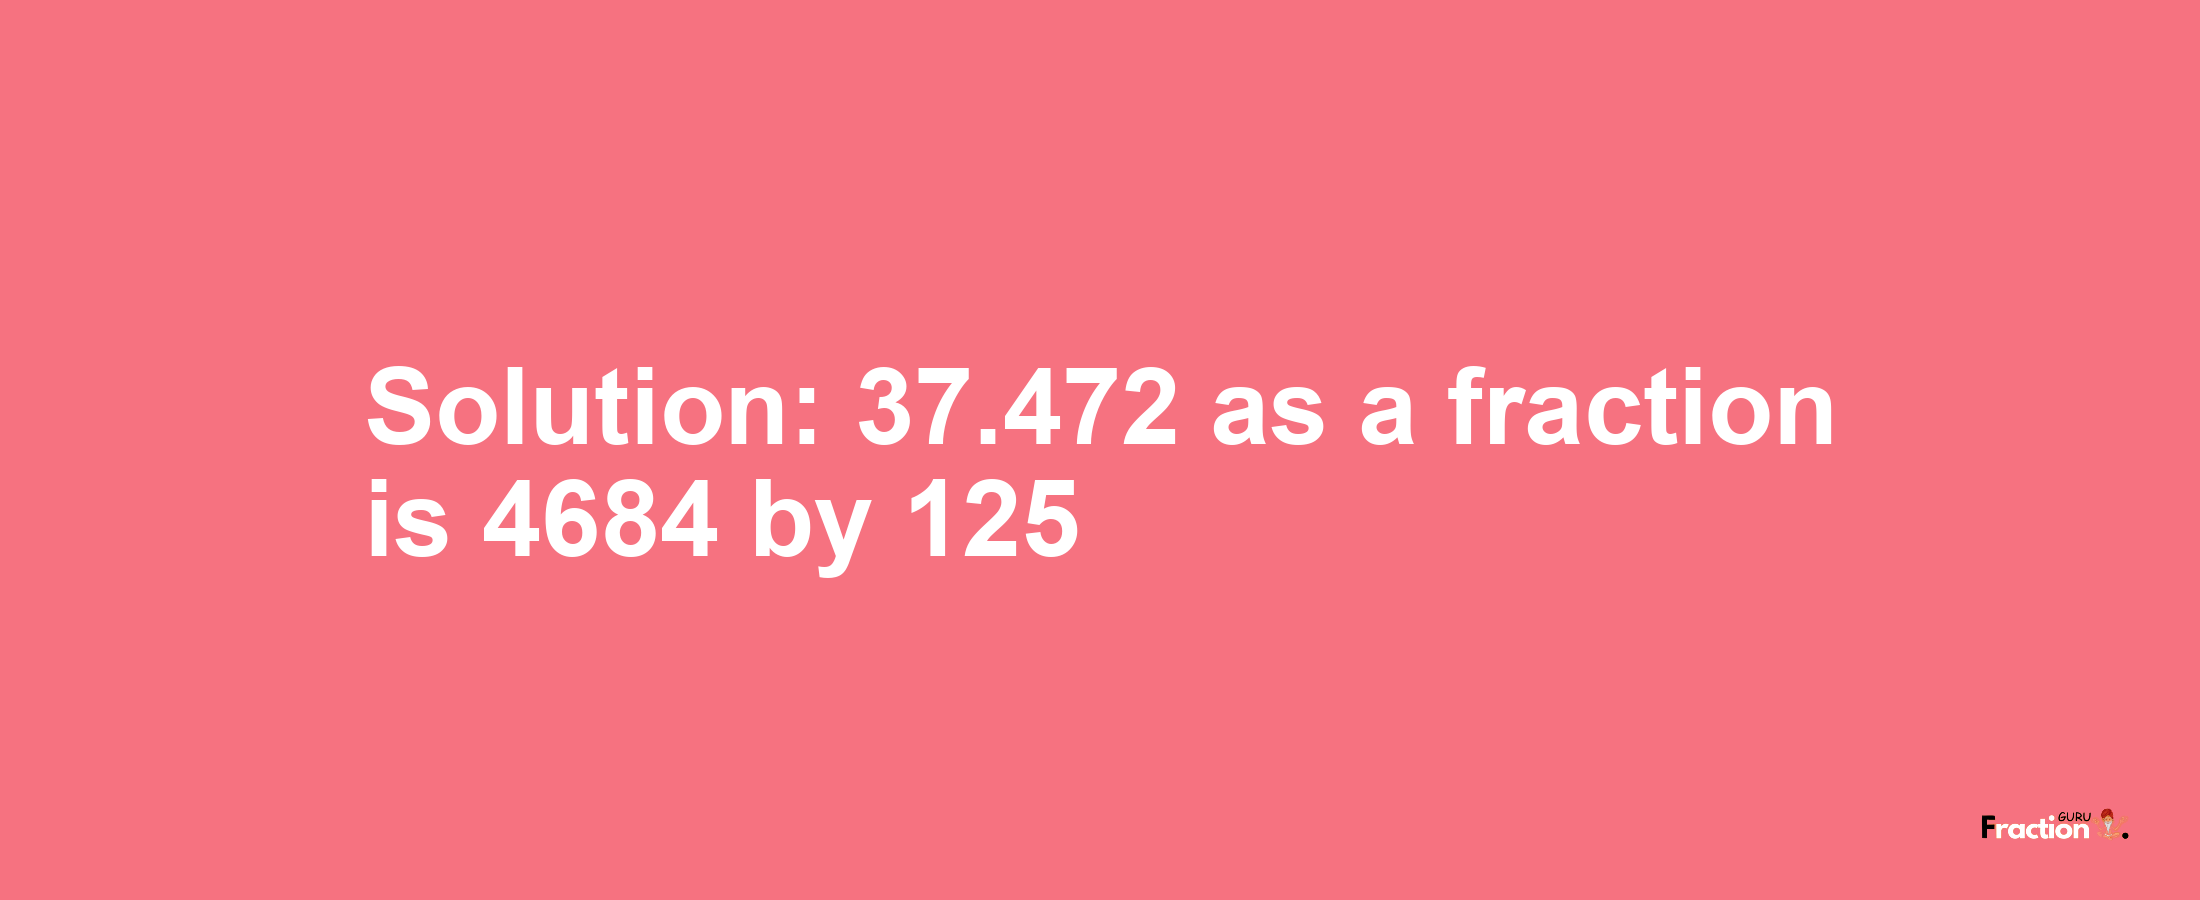 Solution:37.472 as a fraction is 4684/125